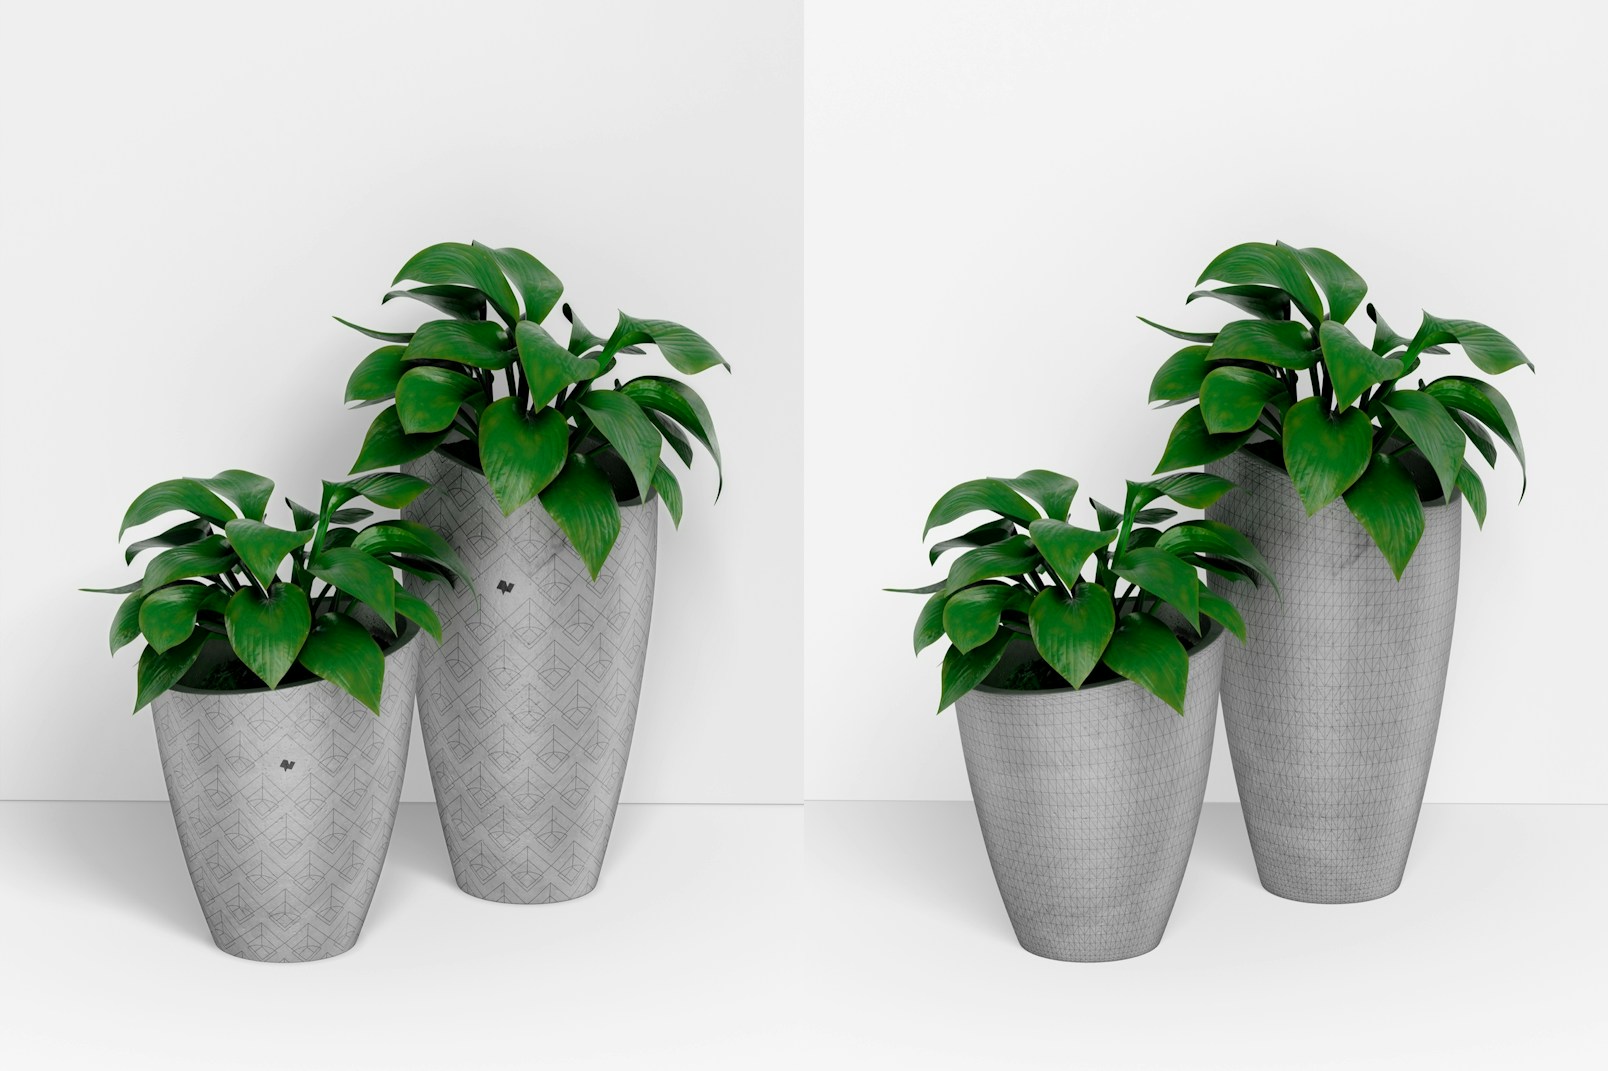 Round Tall Cement Pots with Plants Mockup